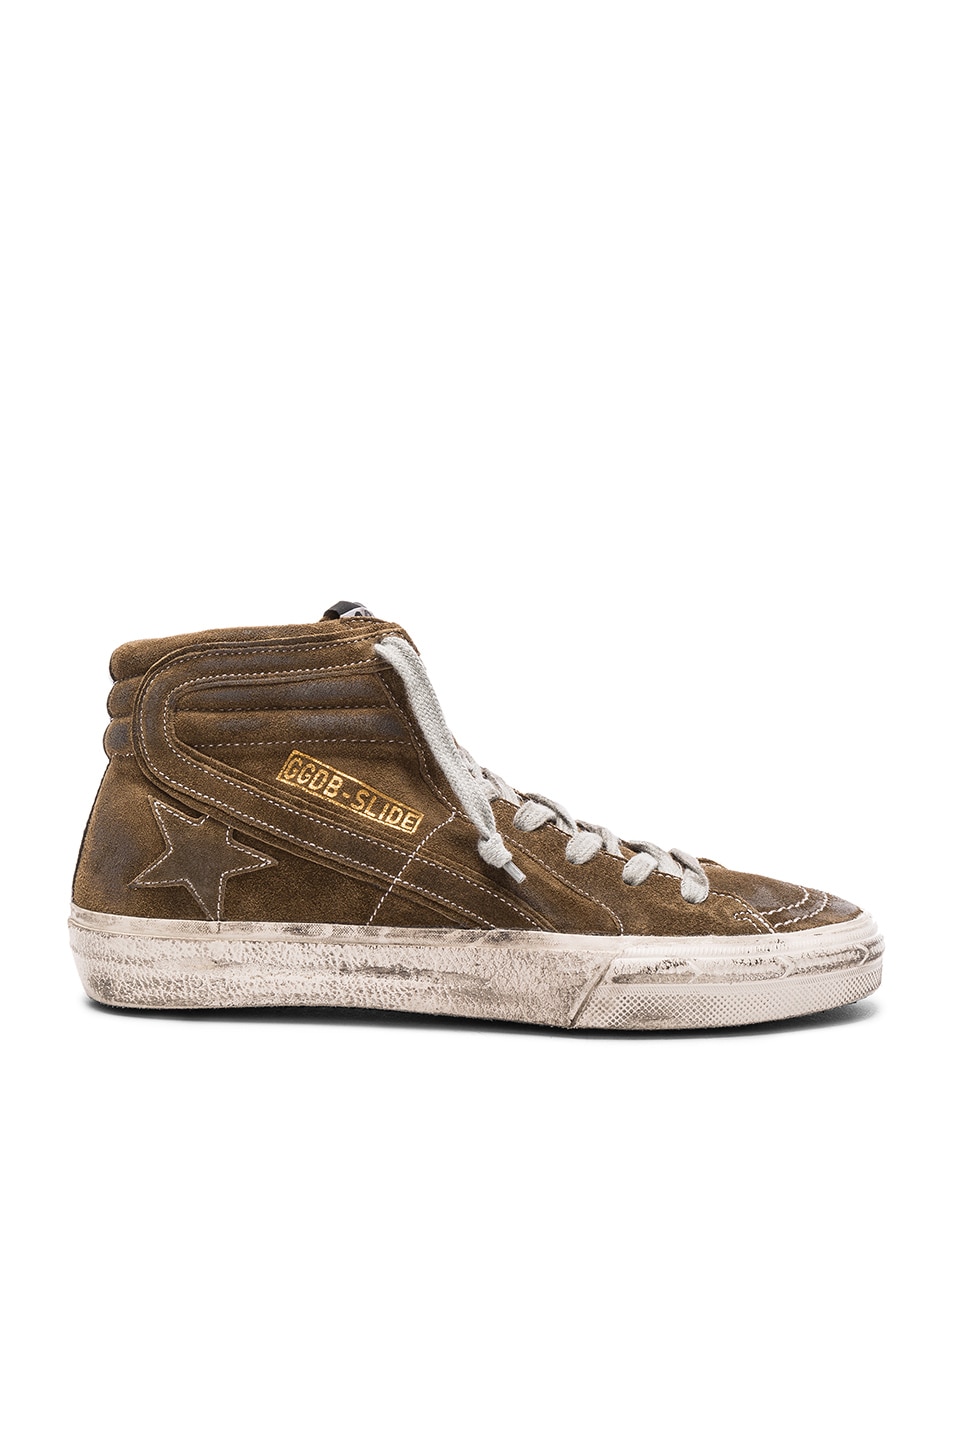 Image 1 of Golden Goose Suede Slide Sneakers in Green Leather & Bluette